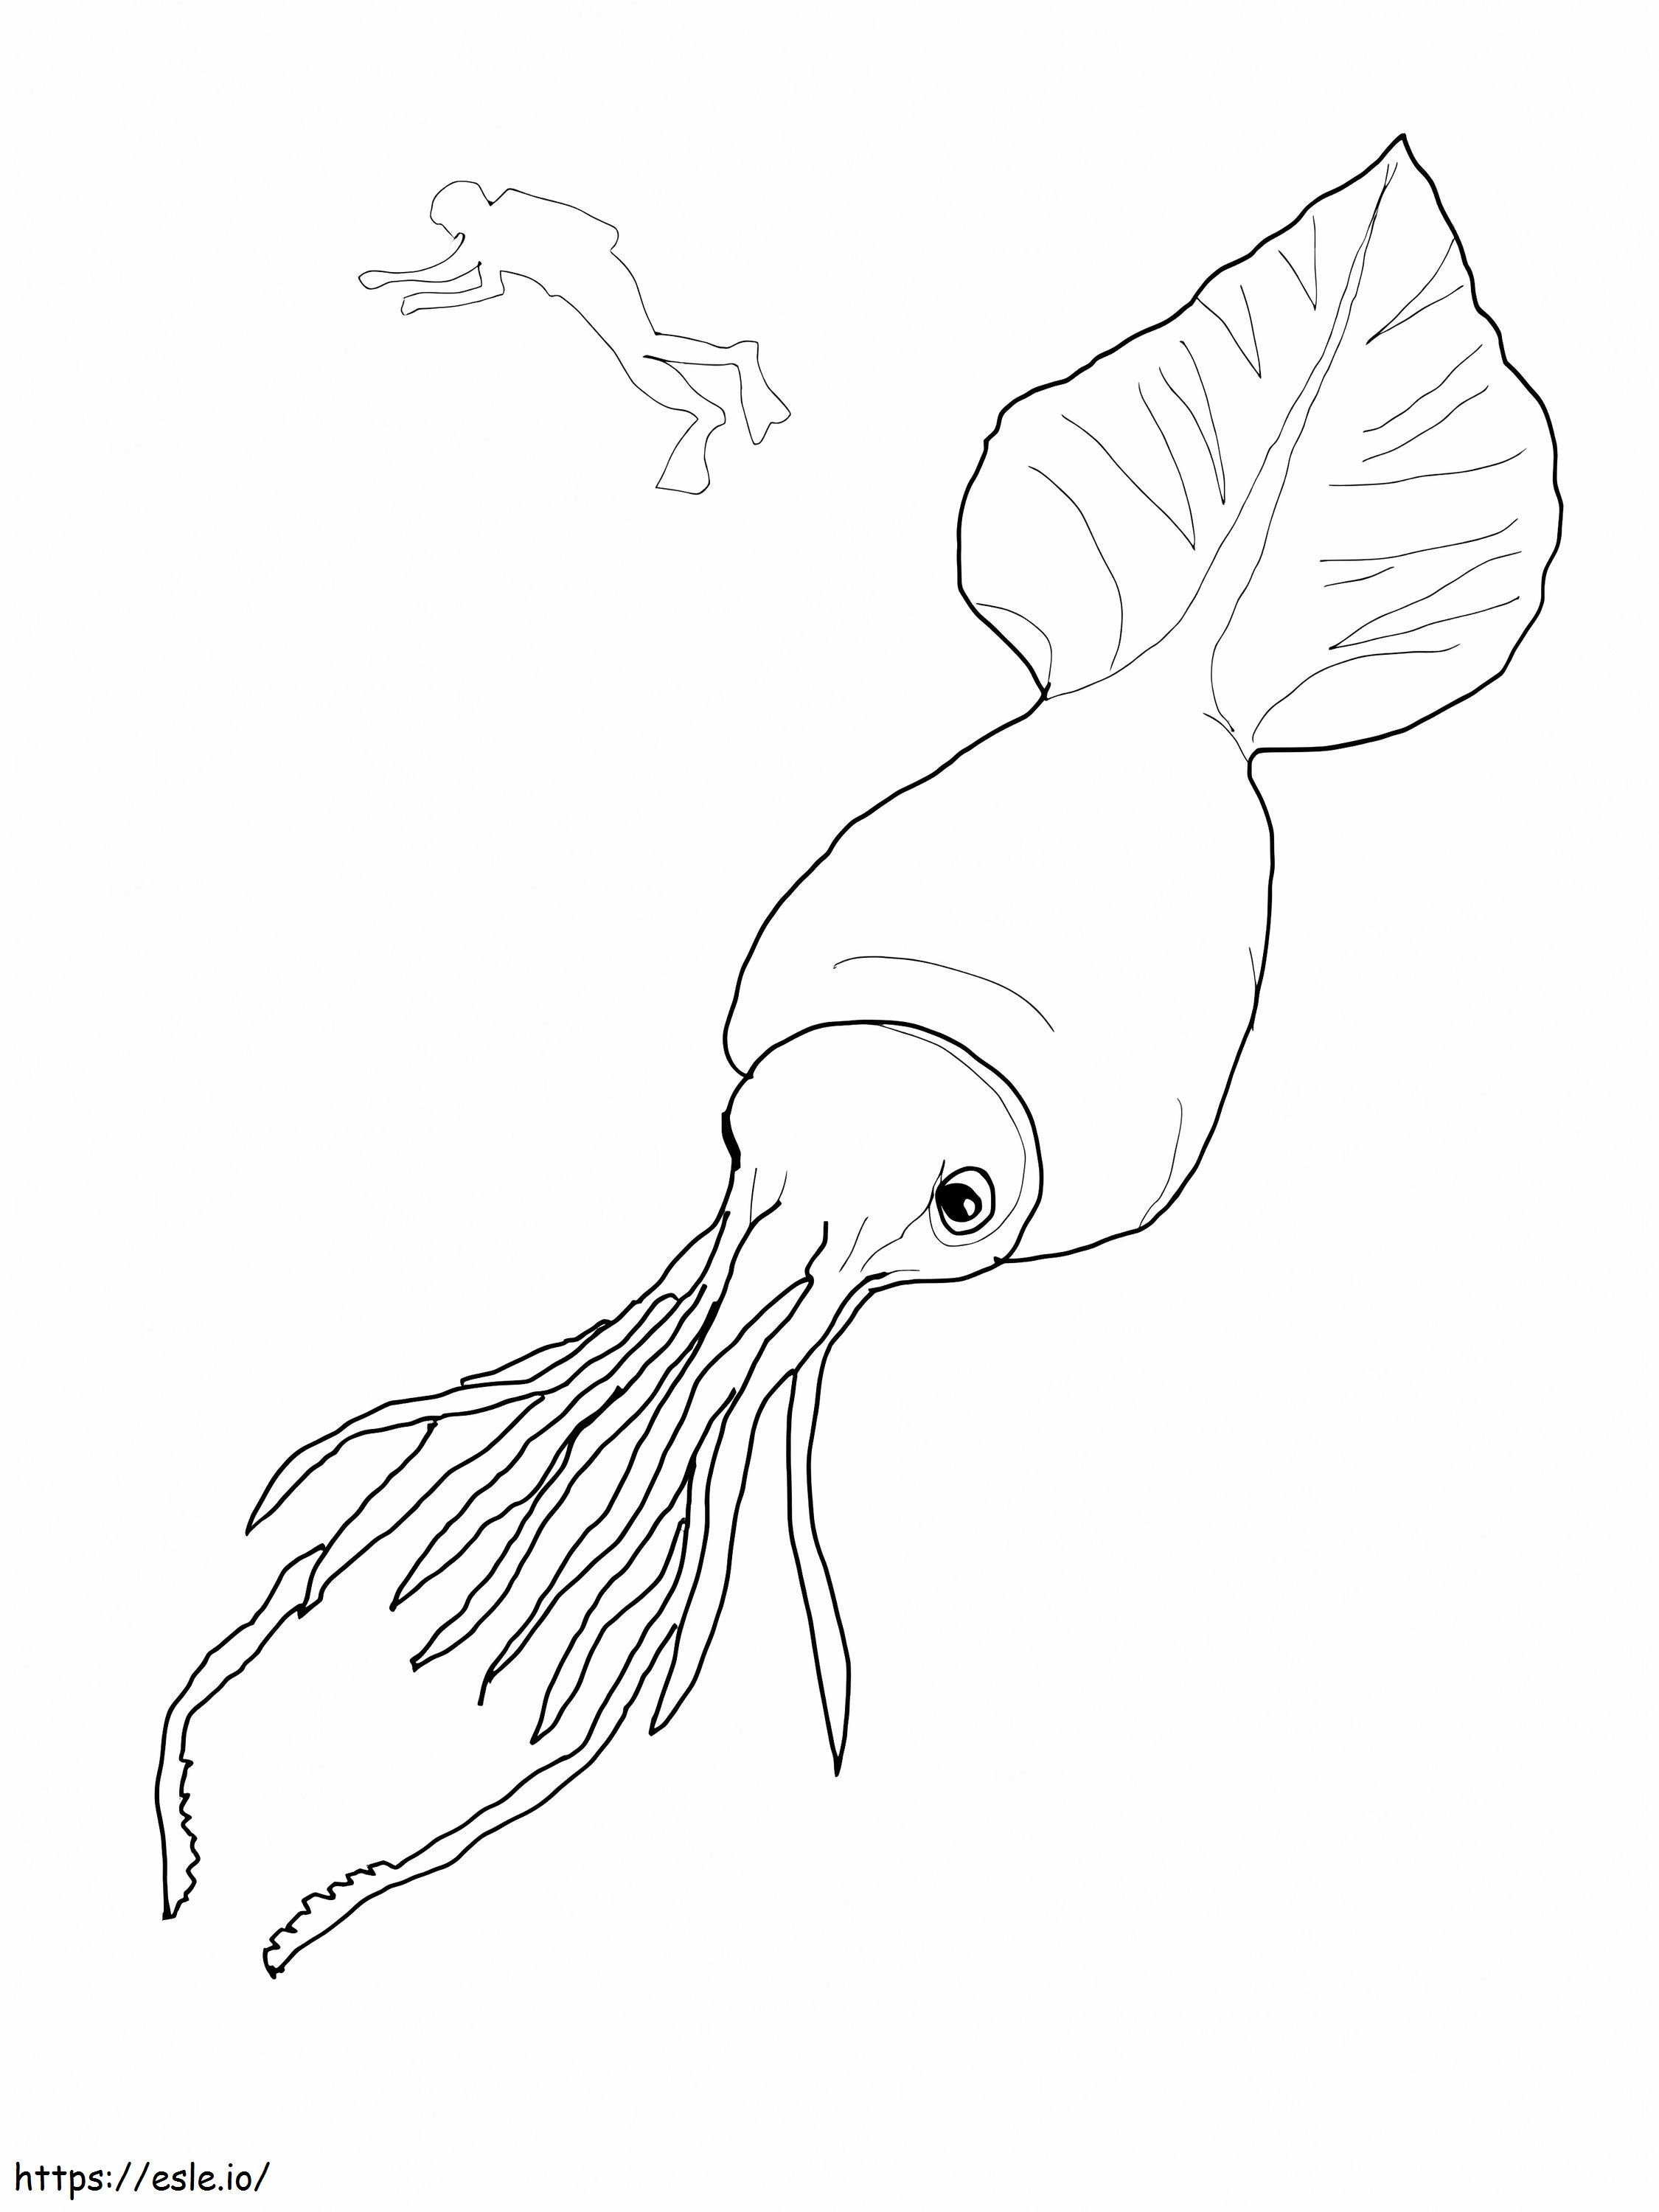 Squid And People coloring page